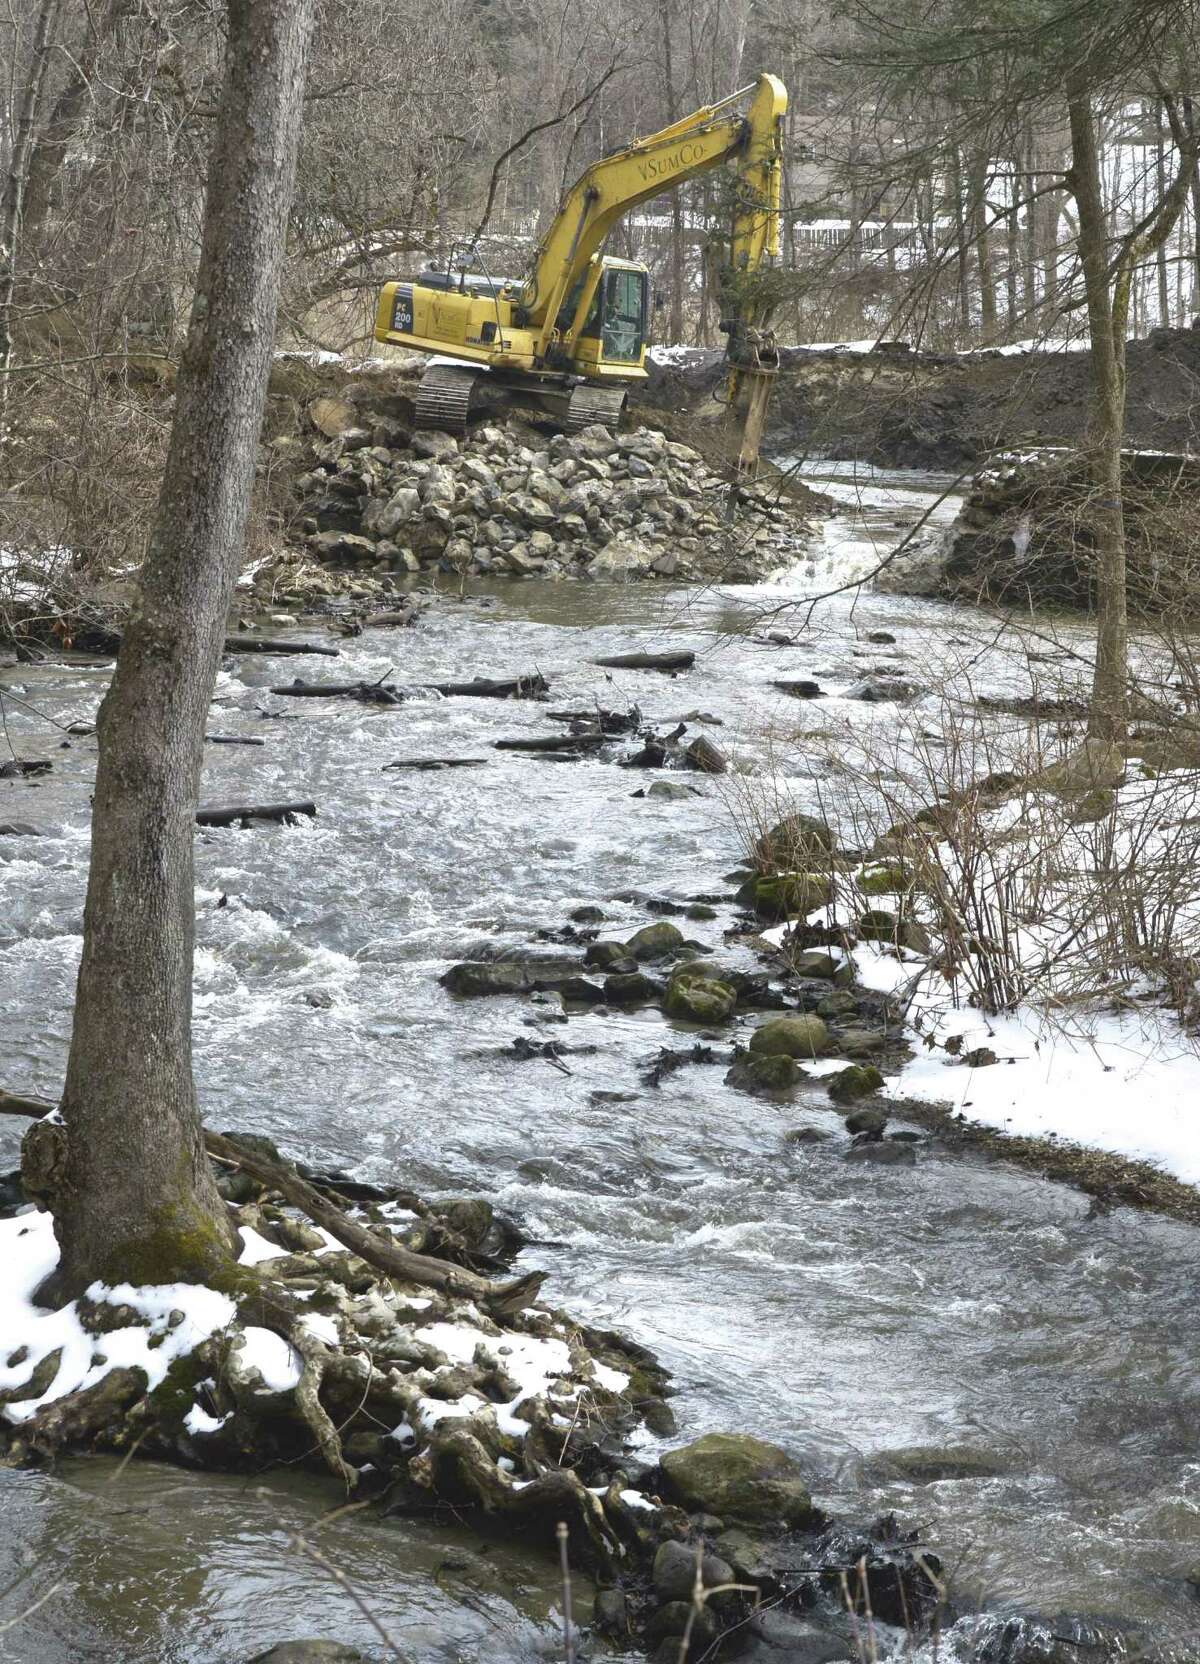 Excavator operator Jarrod Martellacci, works on removing the Old Papermill Dam on the East Aspetuck River. The dam belongs to the Ousatonic Fish & Game Protection Association and its removal is being overseen by the Nature Conservancy. Friday, February 22, 2019, in New Milford, Conn.